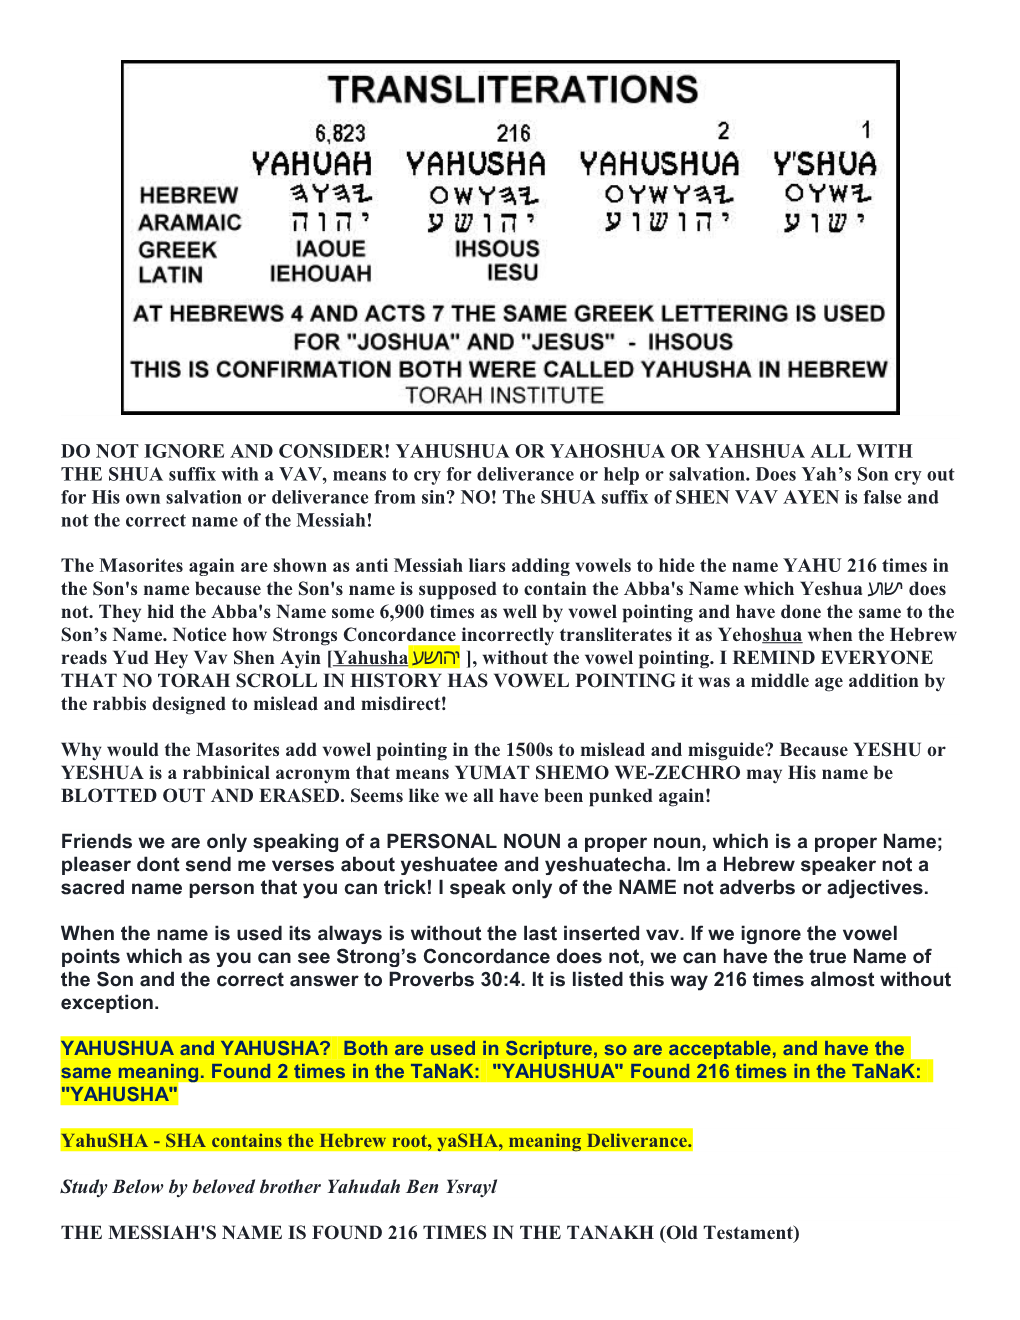 The Masorites Again Are Shown As Anti Messiah Liars Adding Vowels to Hide the Name YAHU